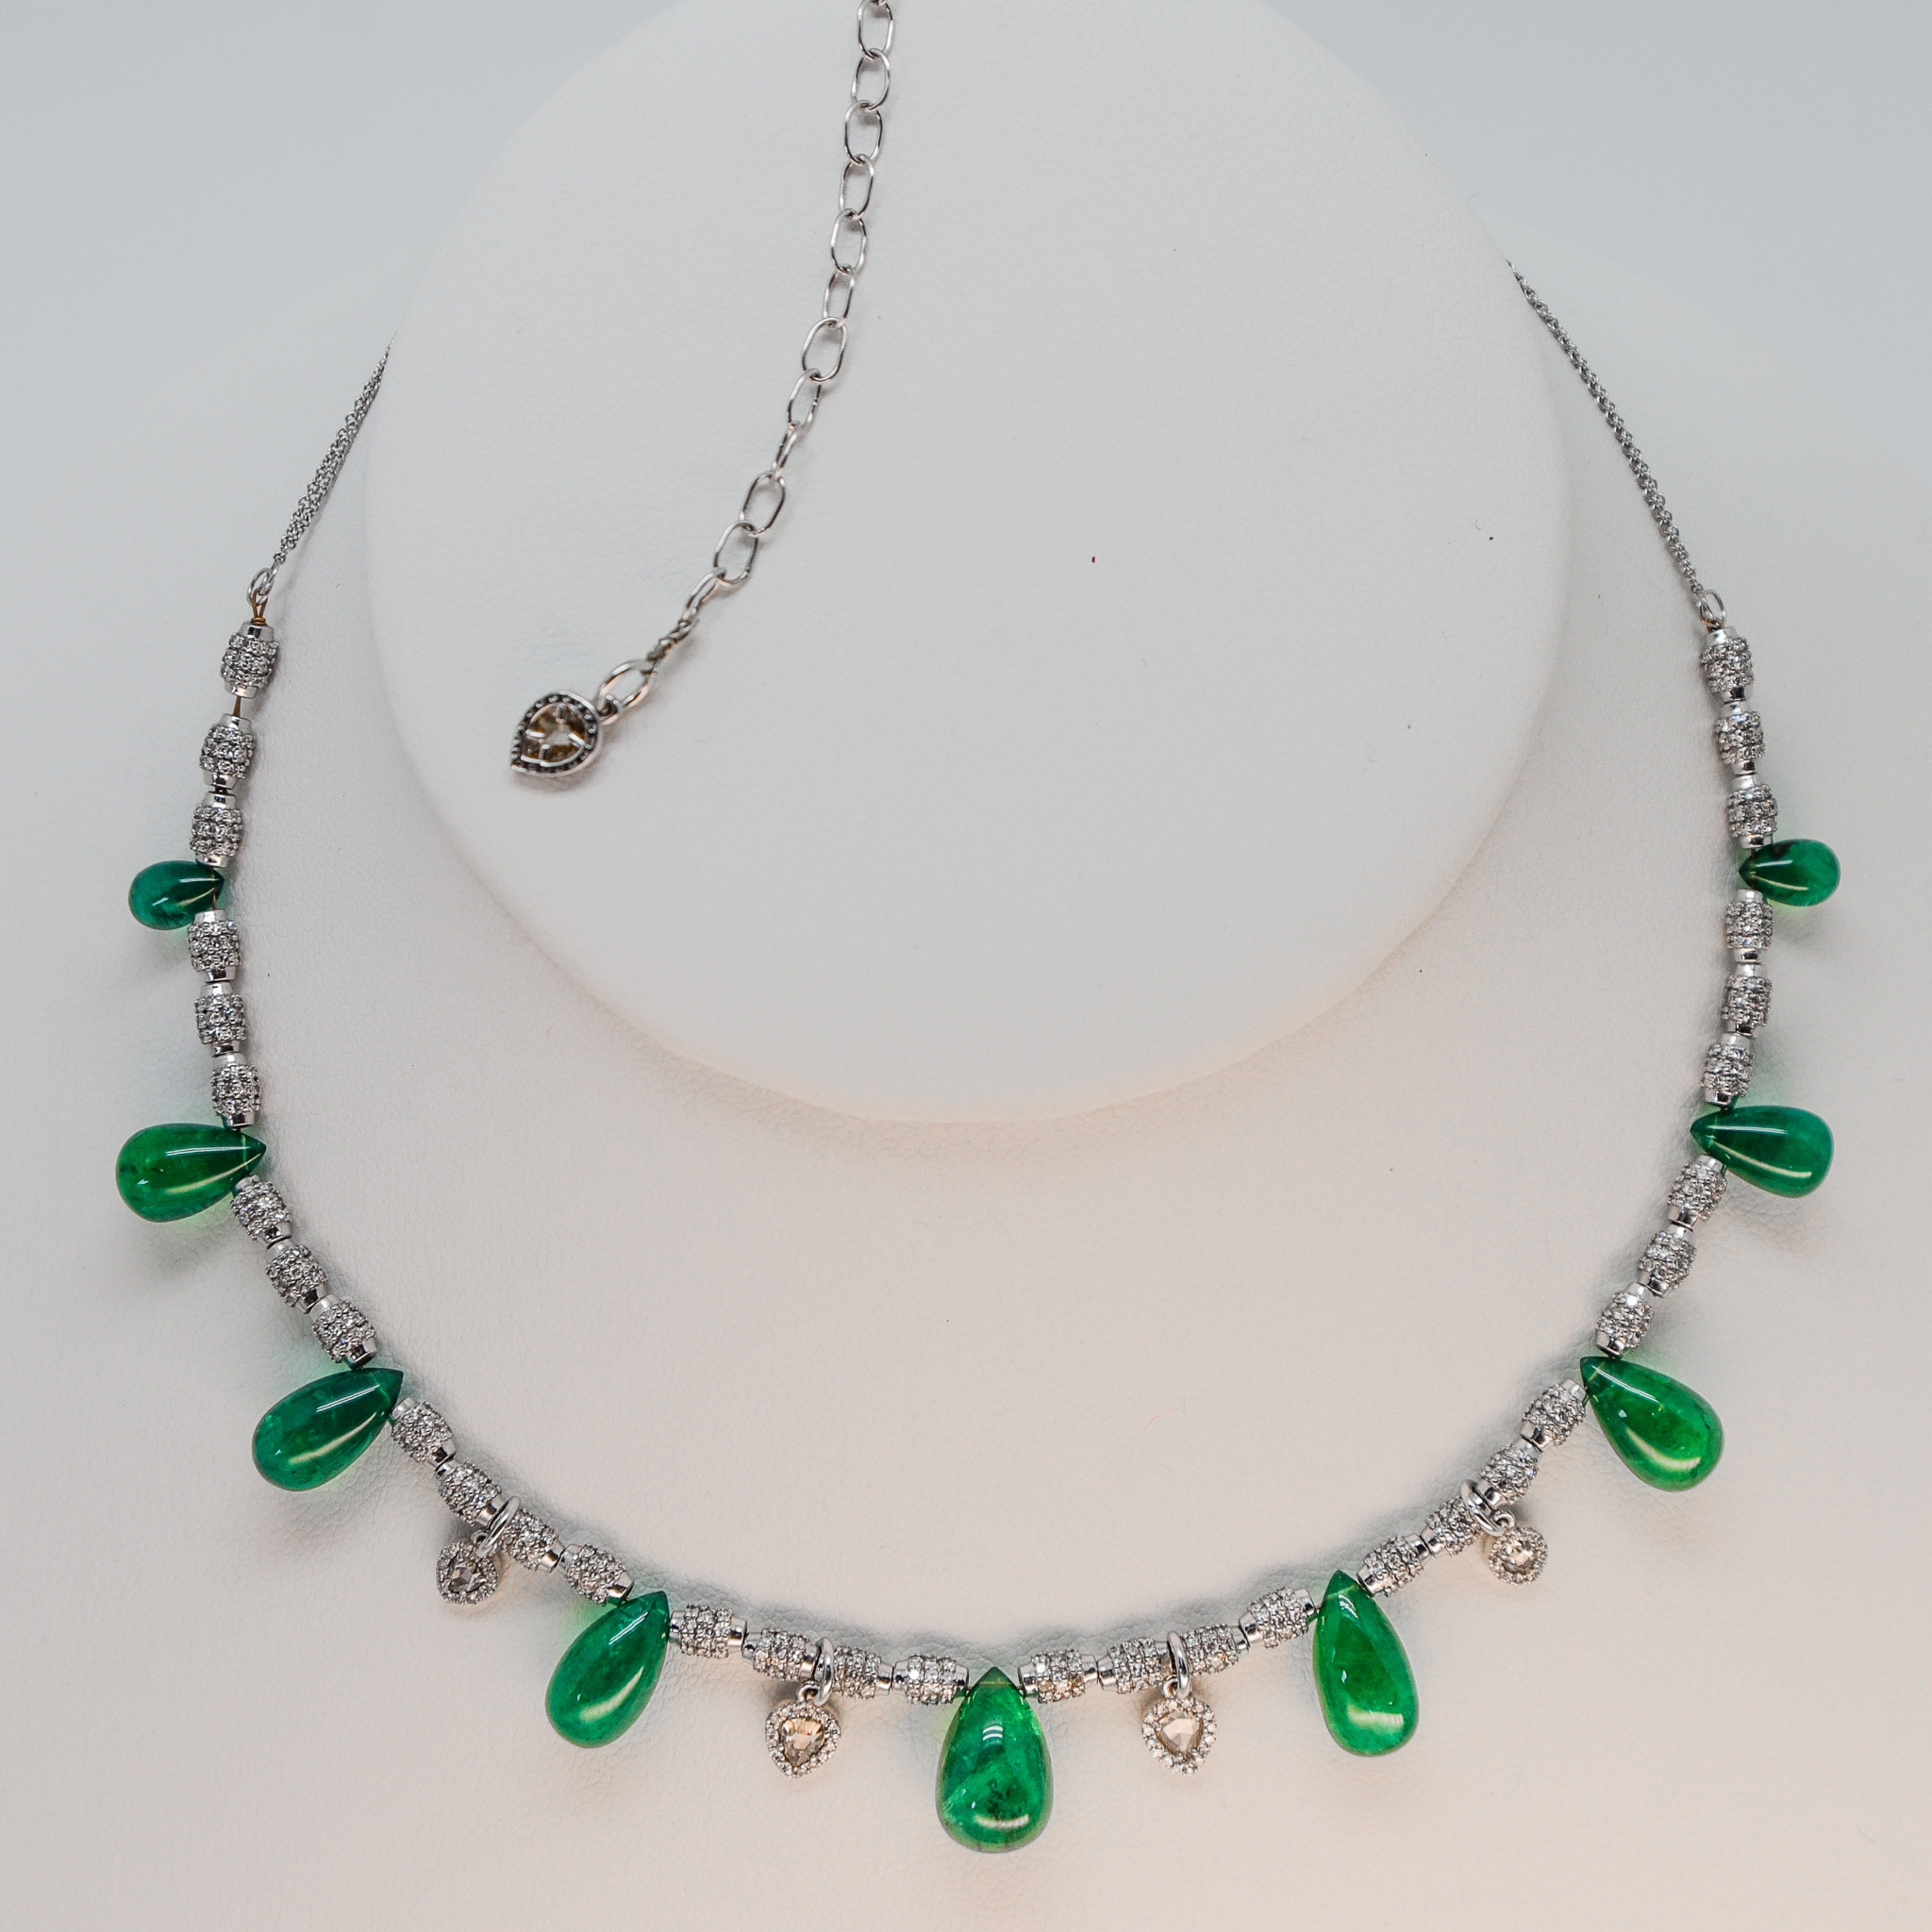 emerald and diamond bead necklace on display showing diamond charm at the end of the adjustment chain